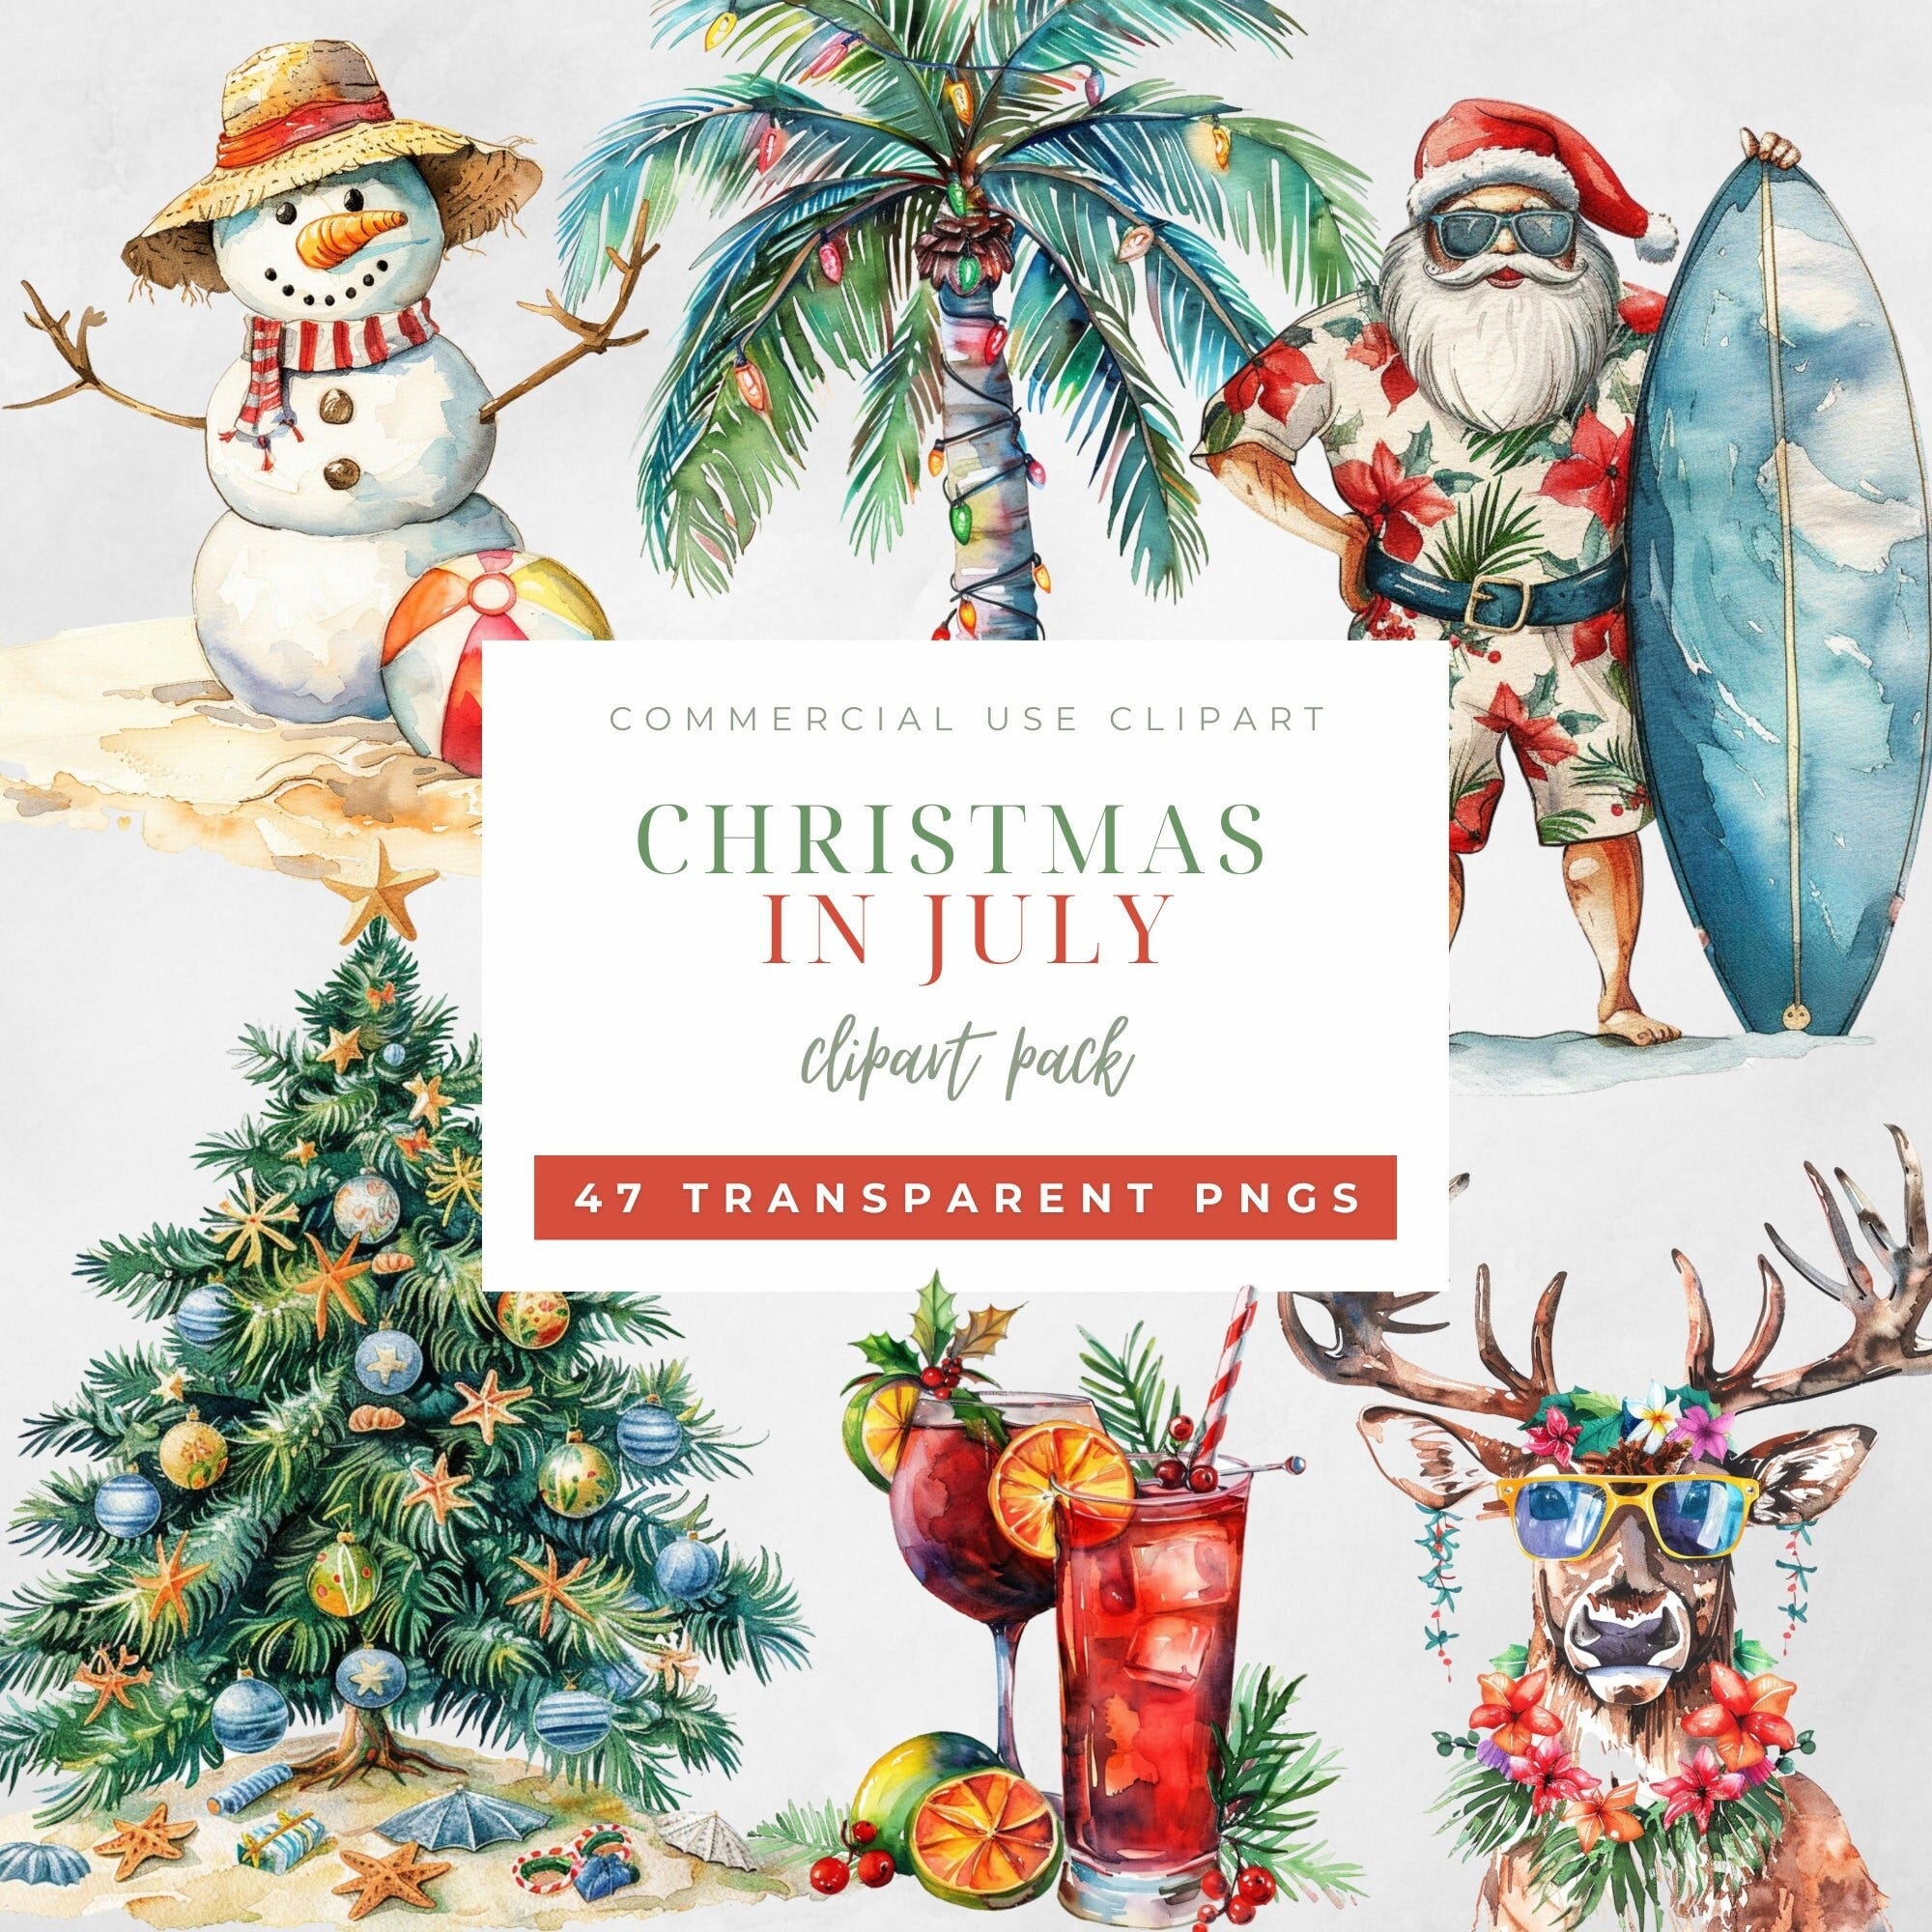 Summer Christmas in July PNG Clipart Beach Tropical Holiday Santa Watercolor Bundle Set Transparent Background Digital Paper Craft Graphic